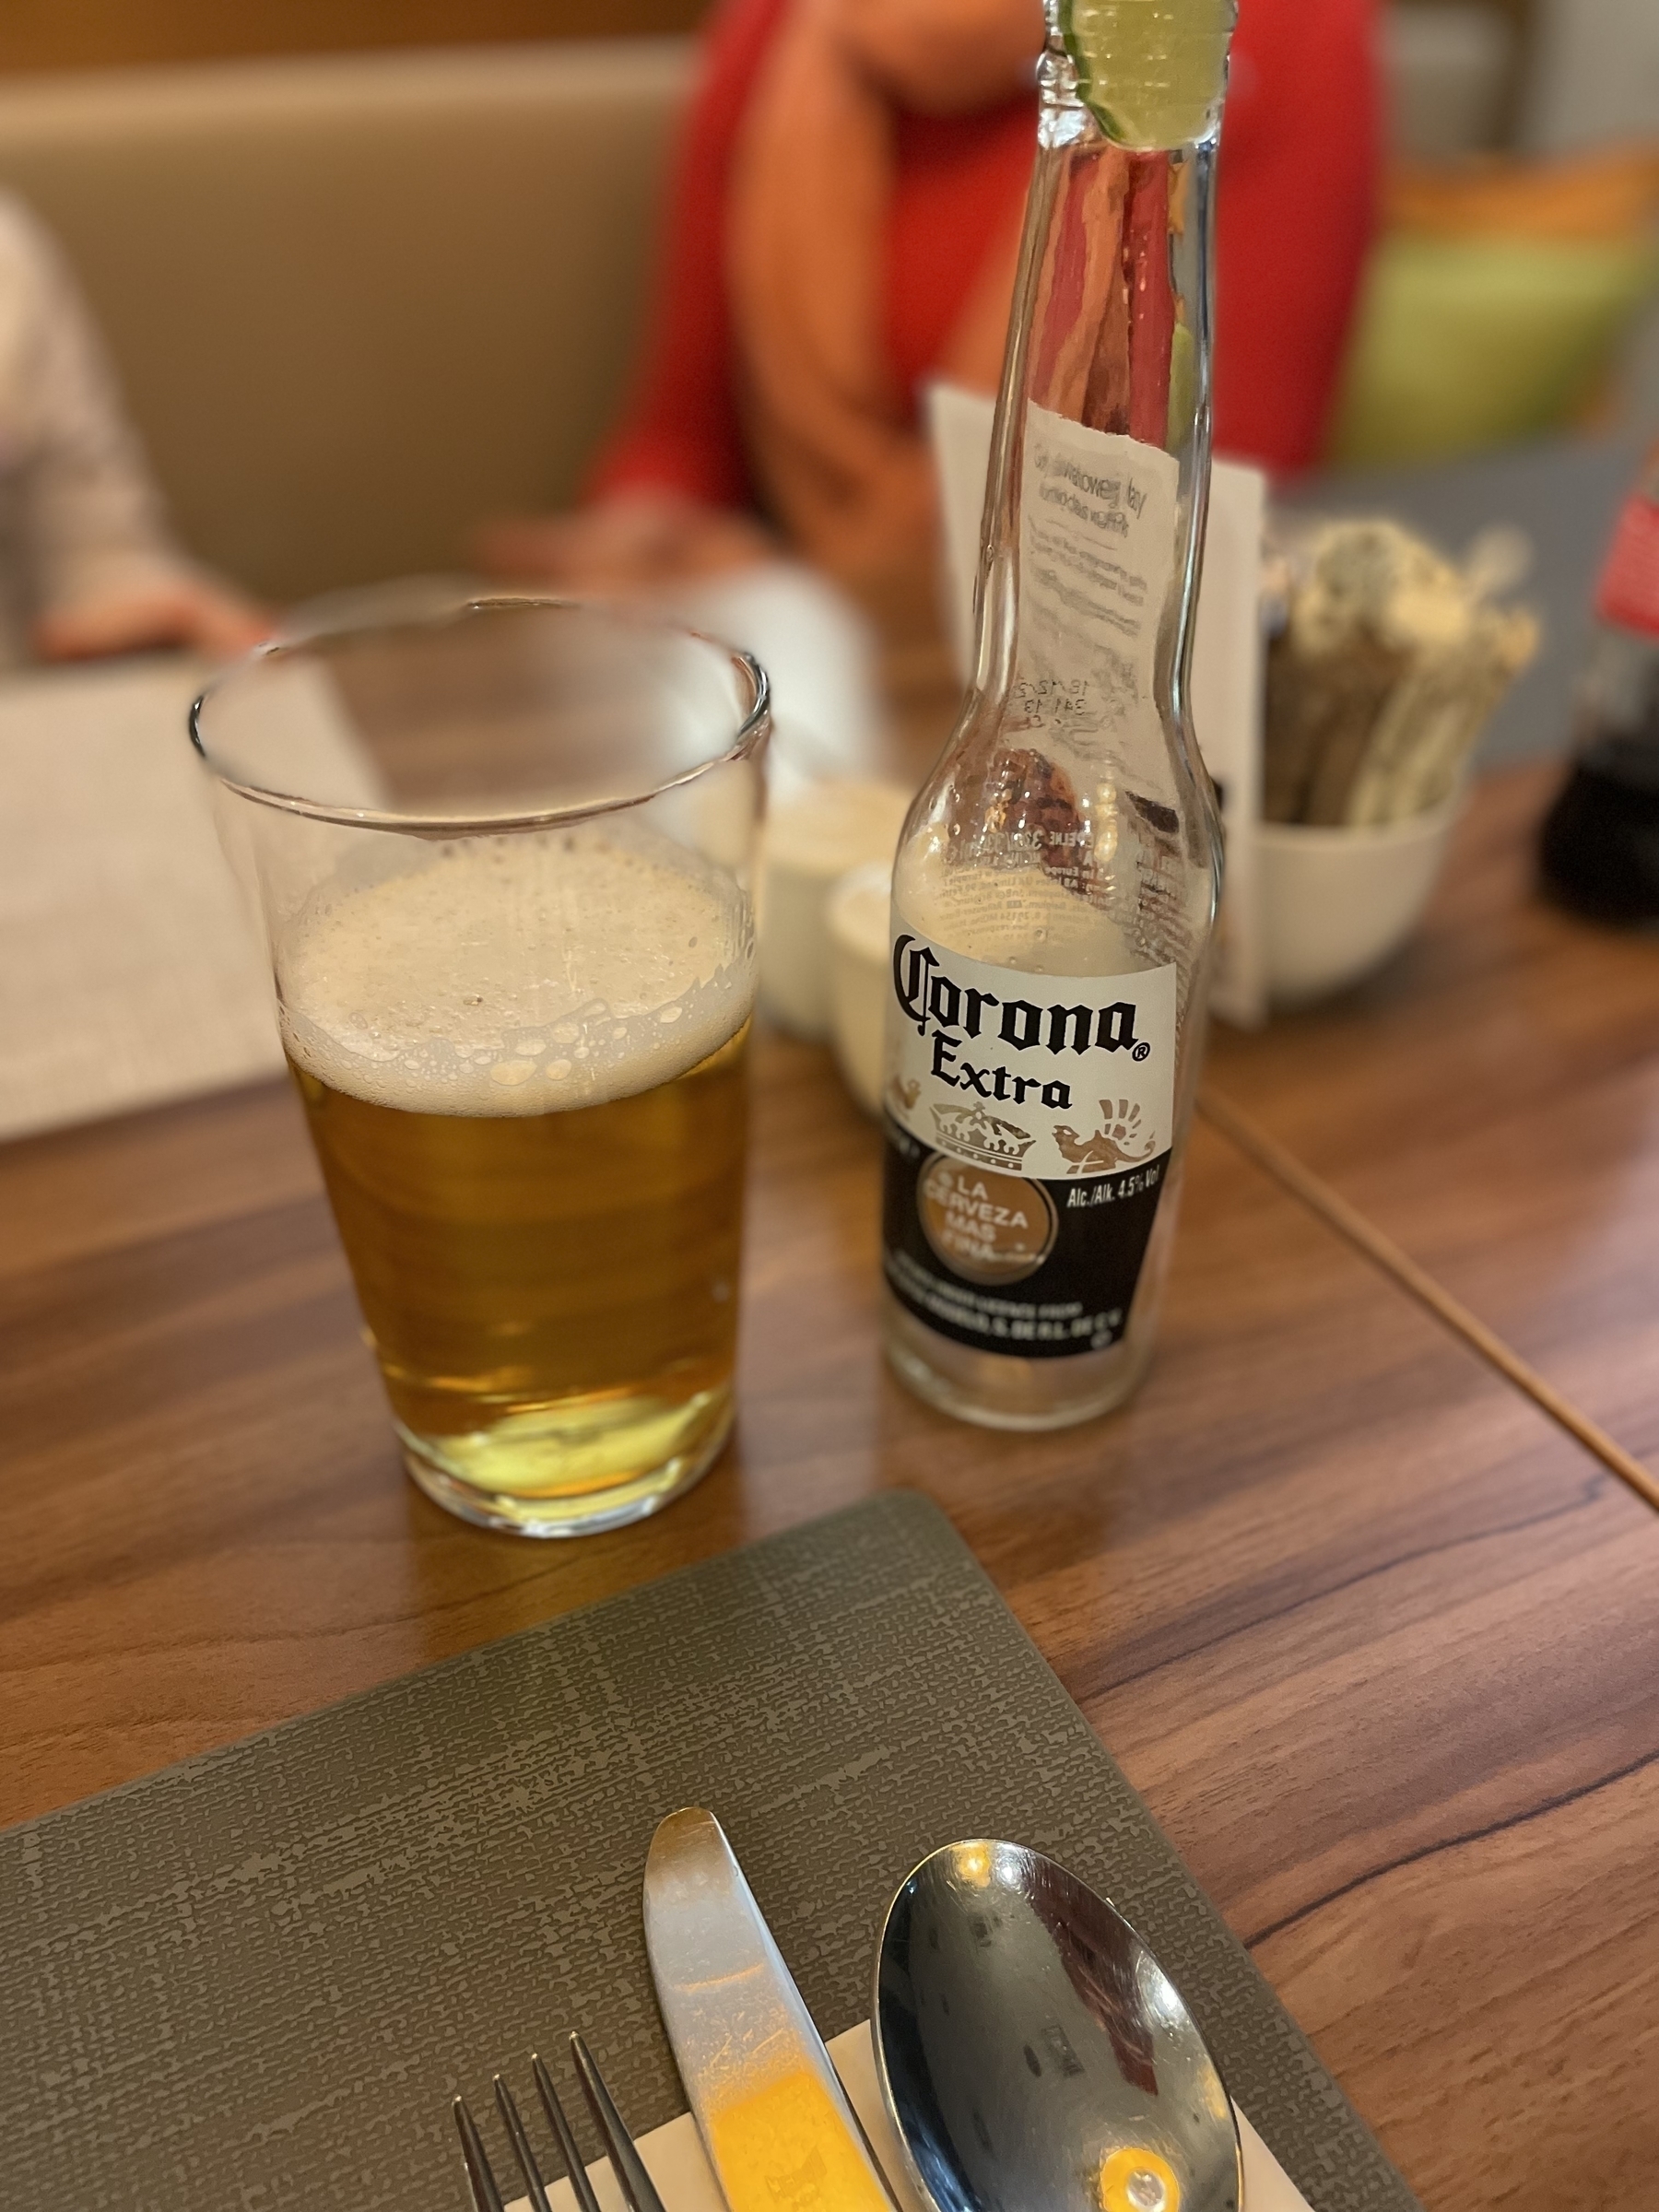 a glass of beer on a table. The beer is Corona. In the background we have a restaurant table and blurred out humans